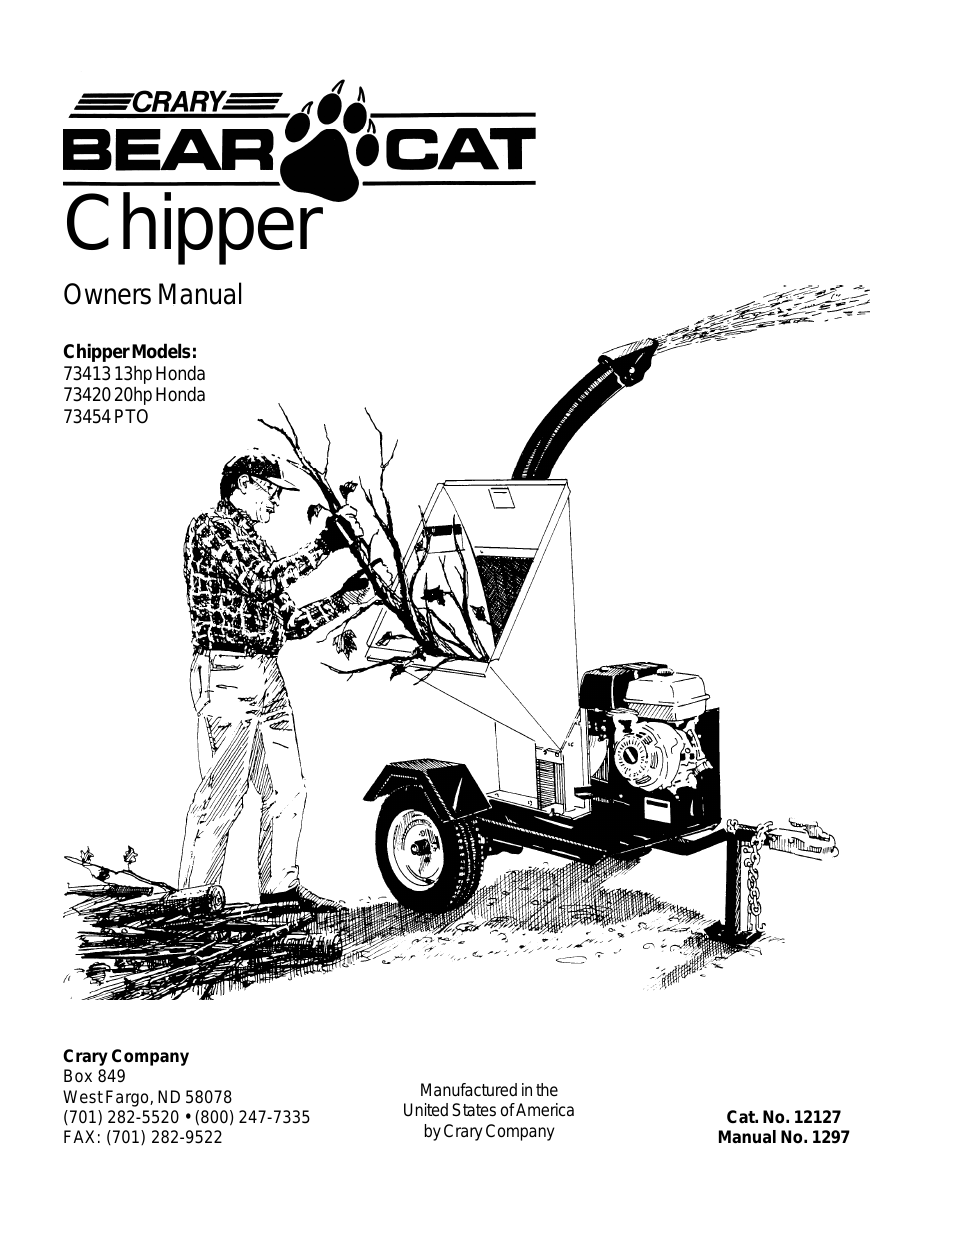 73454 Owners Manual v.2